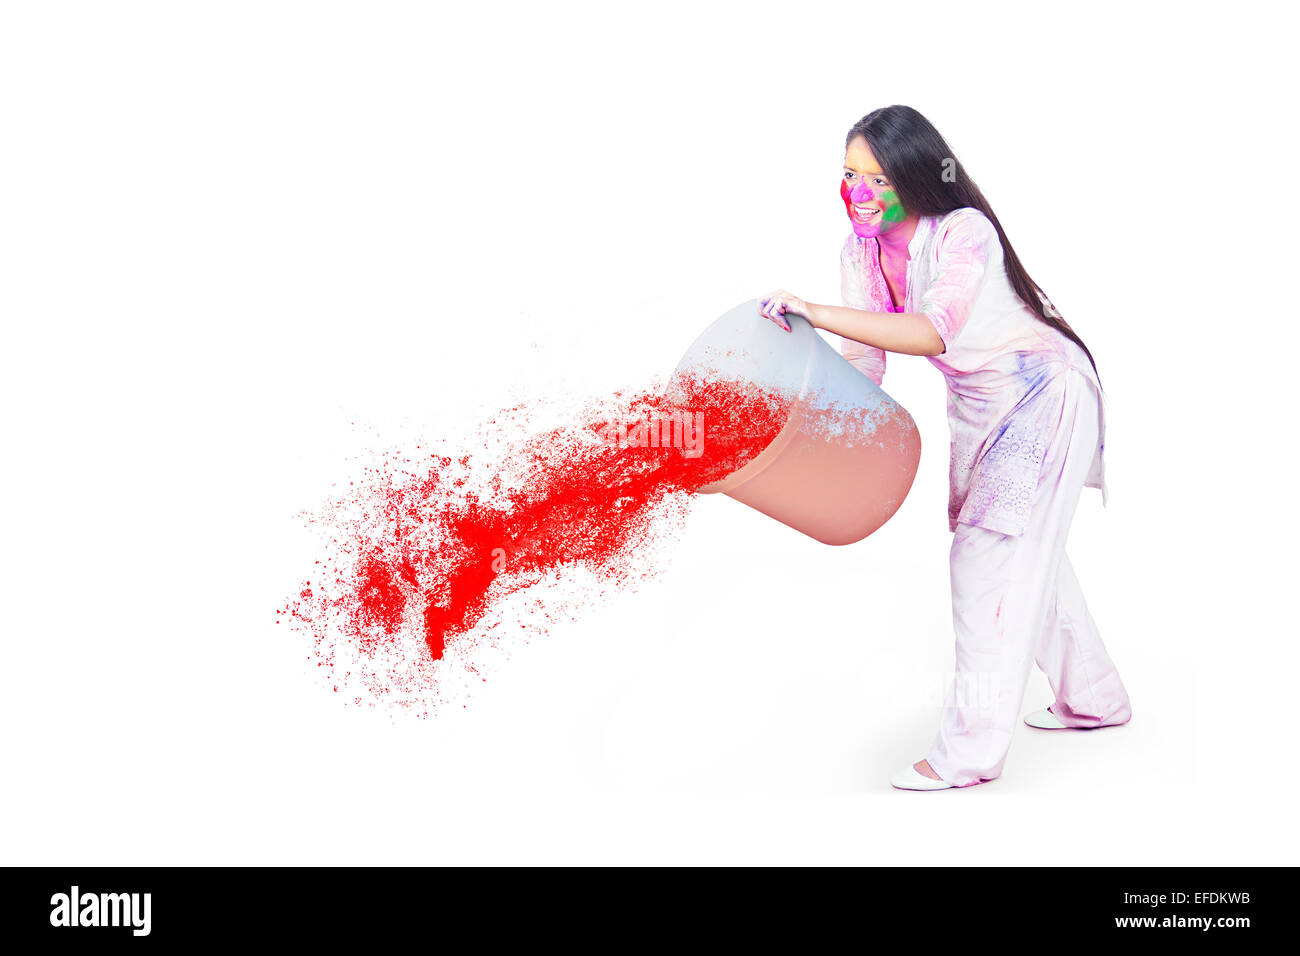 1 indian lady holi Festival Water Throwing Stock Photo